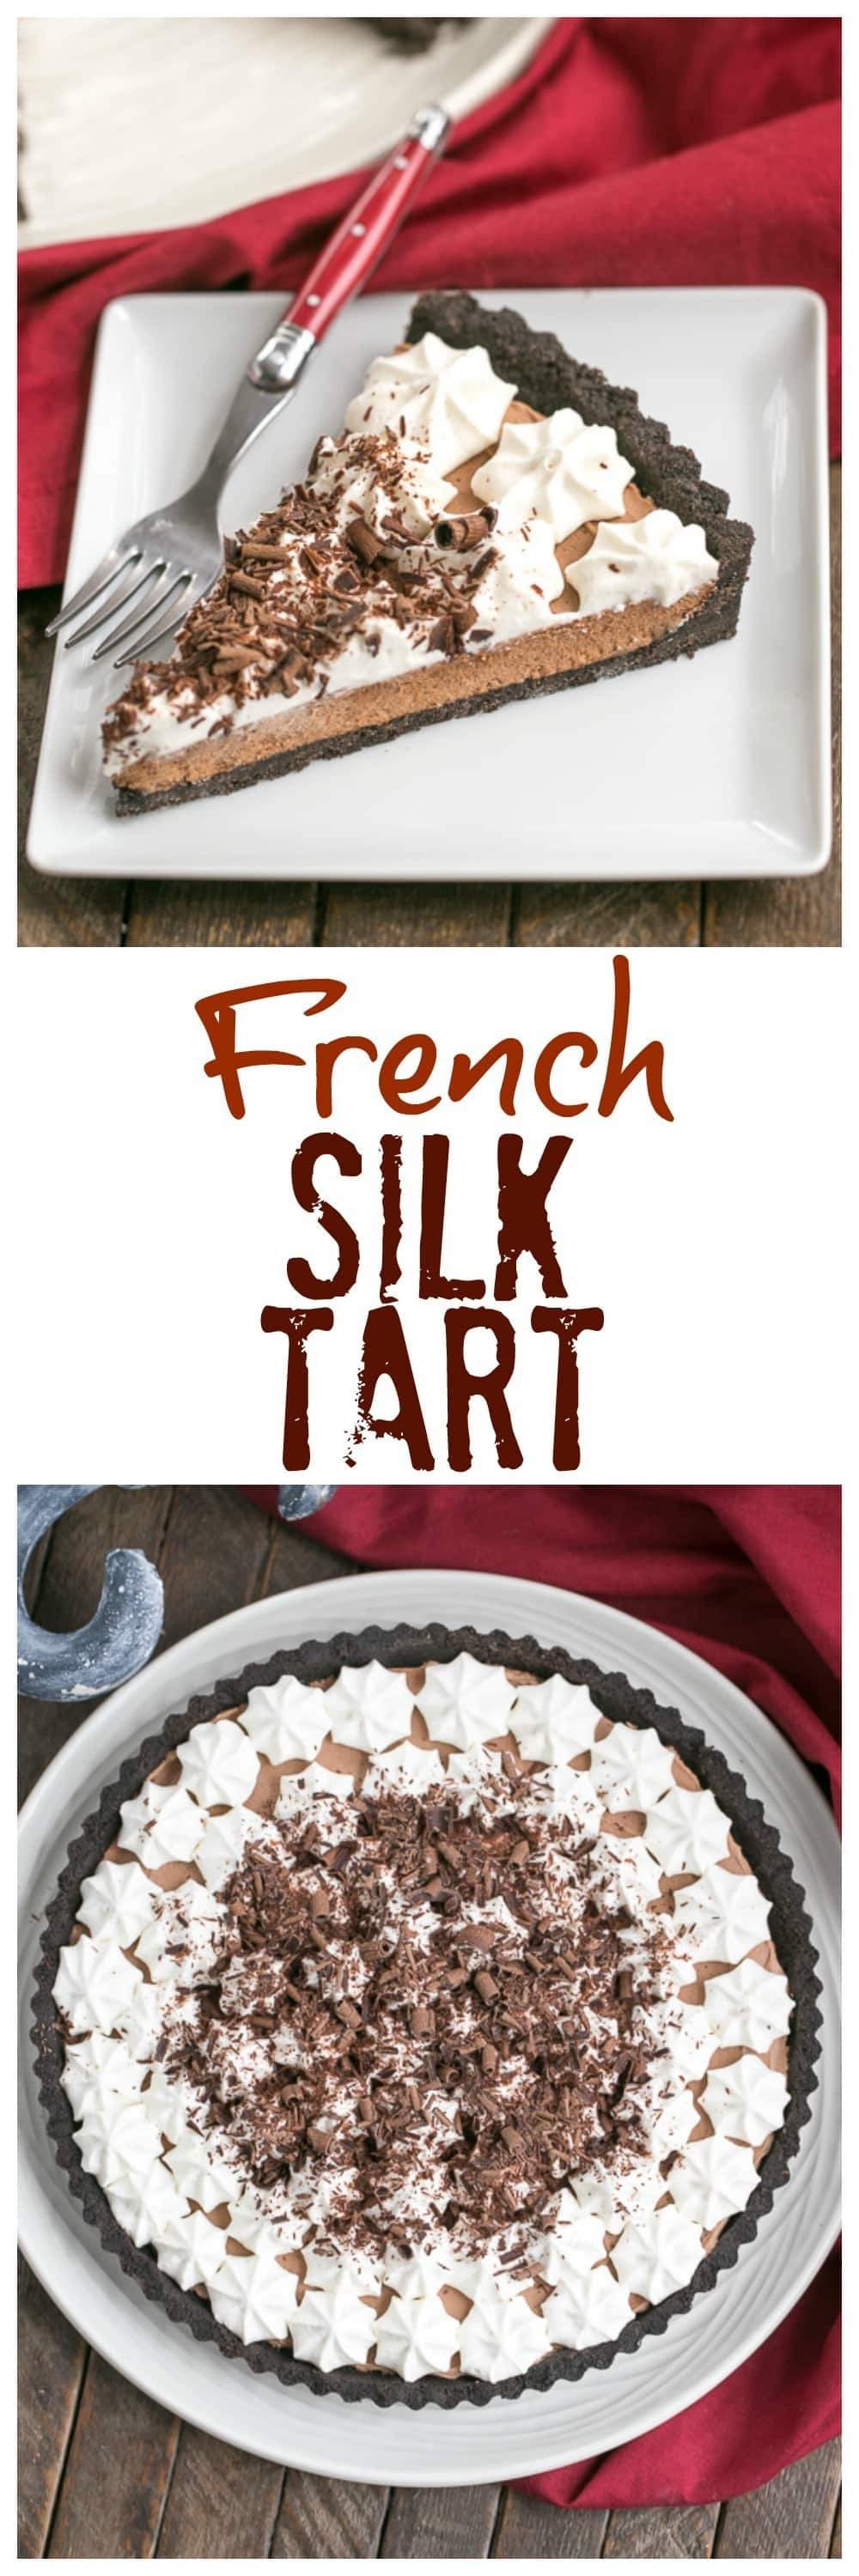 French Silk Tart - That Skinny Chick Can Bake